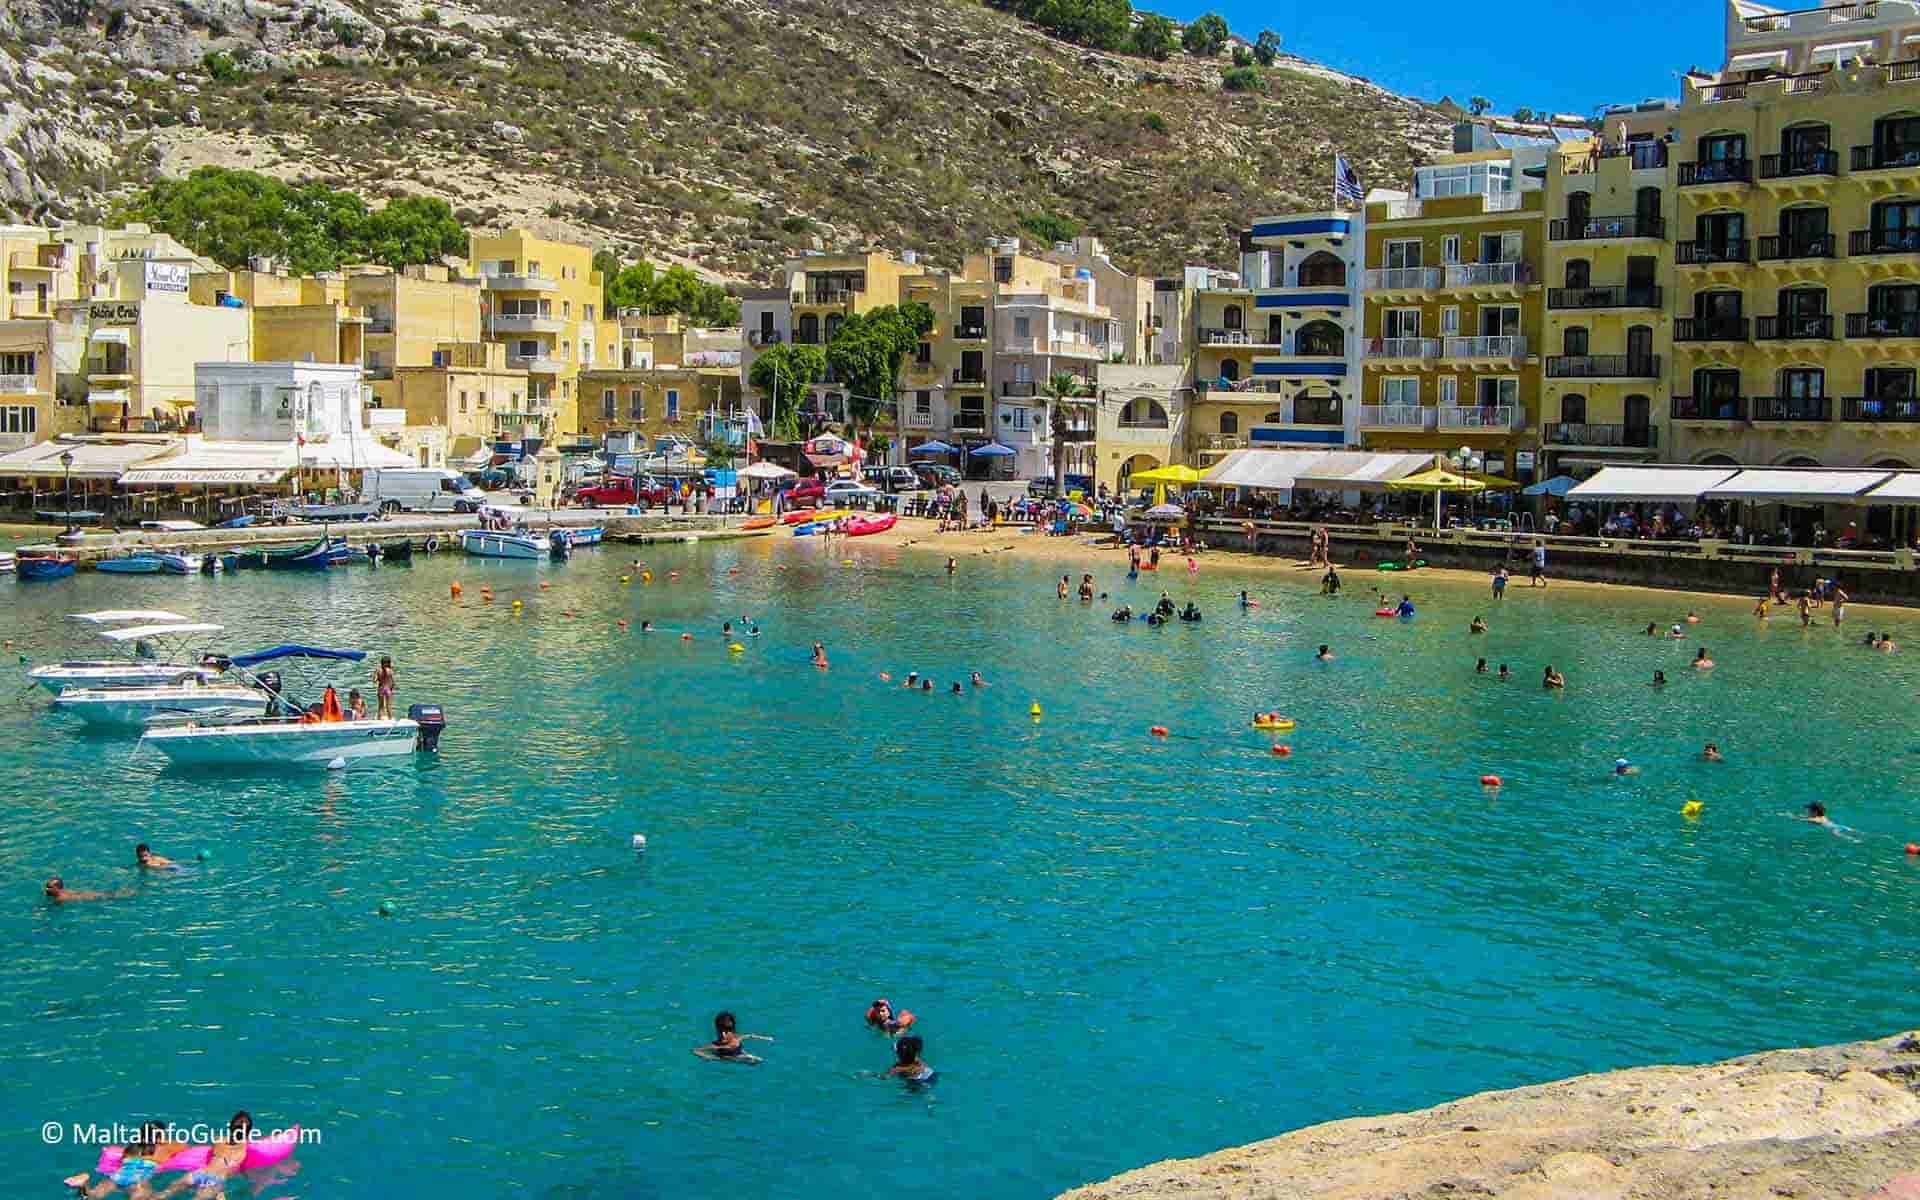 A view of the tiny Xlendi bay while people swimming in the sea